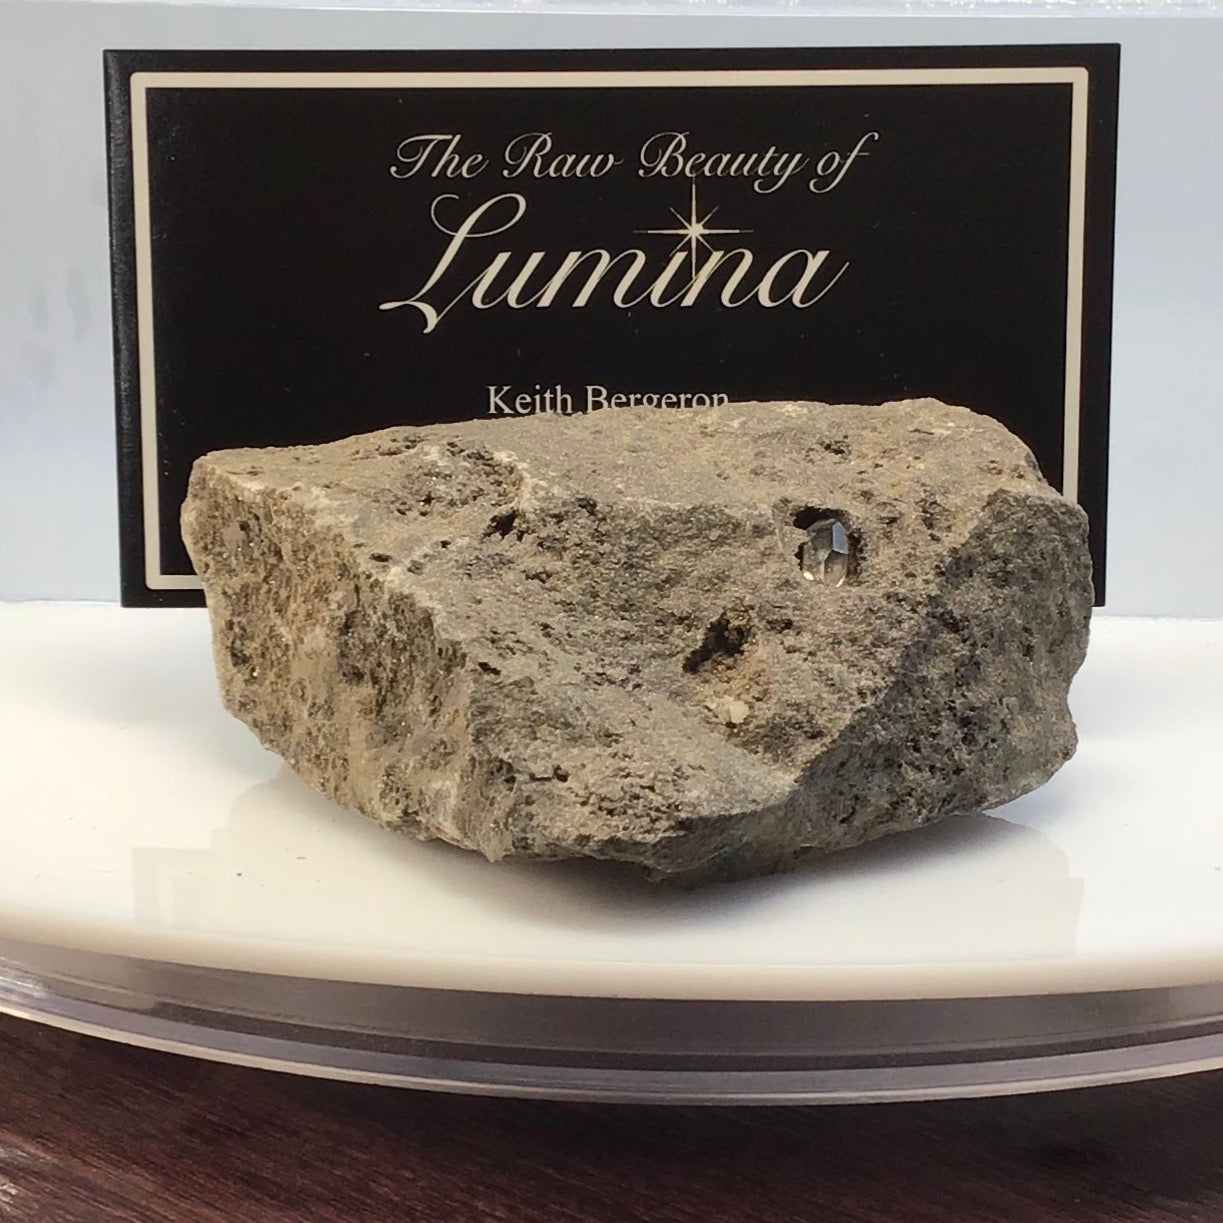 Mineral Specimen crafted into a Business card holder